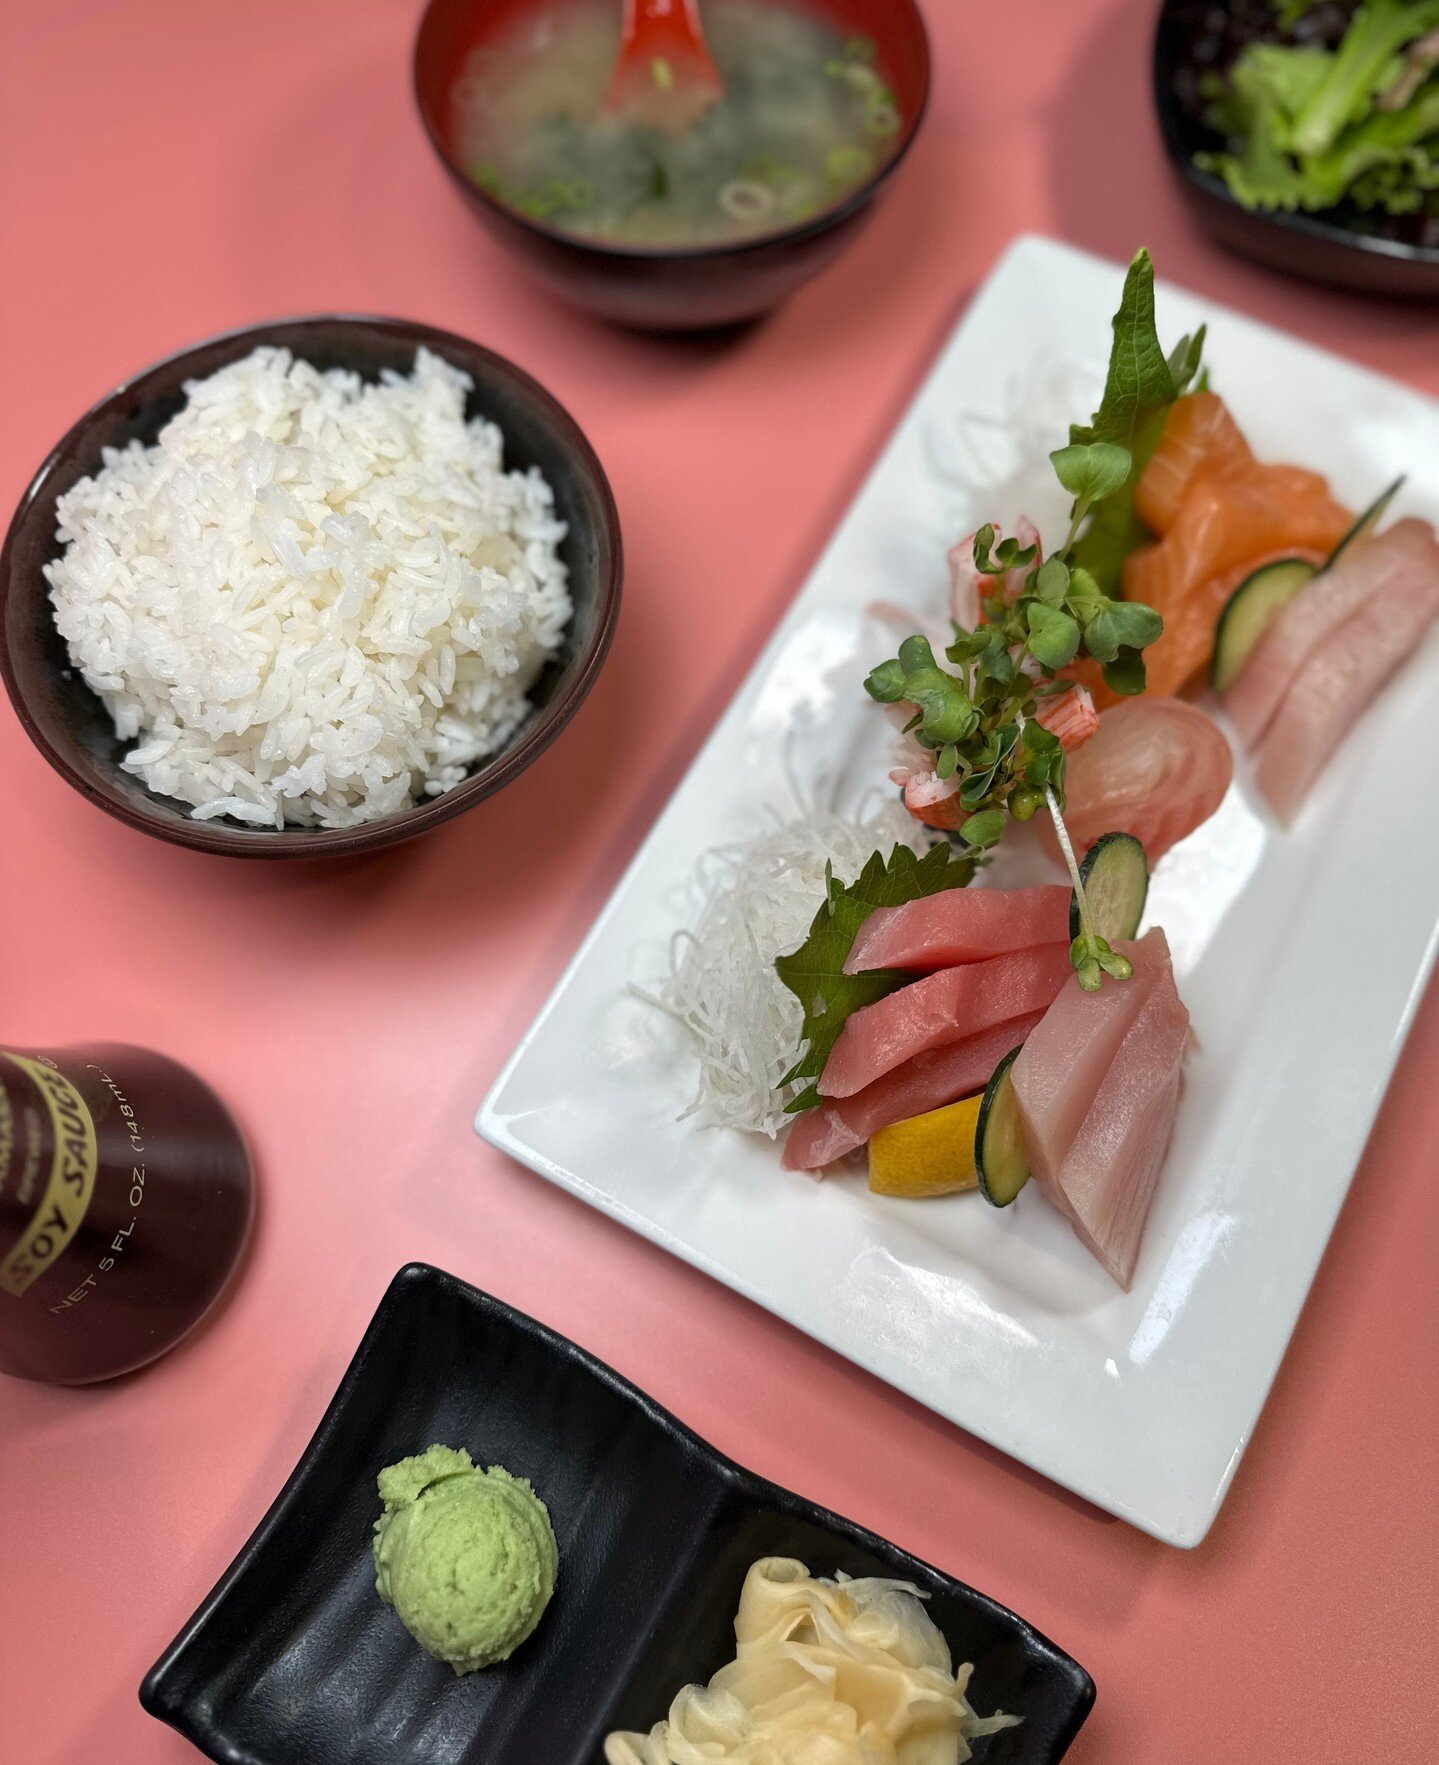 Treat yourself to the ultimate seafood indulgence with our sashimi platter, designed to delight every palate! Visit us today! #UmamiJourney 🍽️😍

◾️◽️◾️◽️◾️◽️◾️◽️◾️◽️ 
🍣 𝗔𝗬𝗖𝗘 𝗦𝗨𝗦𝗛𝗜 𝗛𝗢𝗨𝗦𝗘 𝗚𝗢𝗬𝗘𝗠𝗢𝗡 
⏰ ᴅᴀɪʟʏ: 12:00 ᴘᴍ - 11:00 ᴘᴍ 
⏰